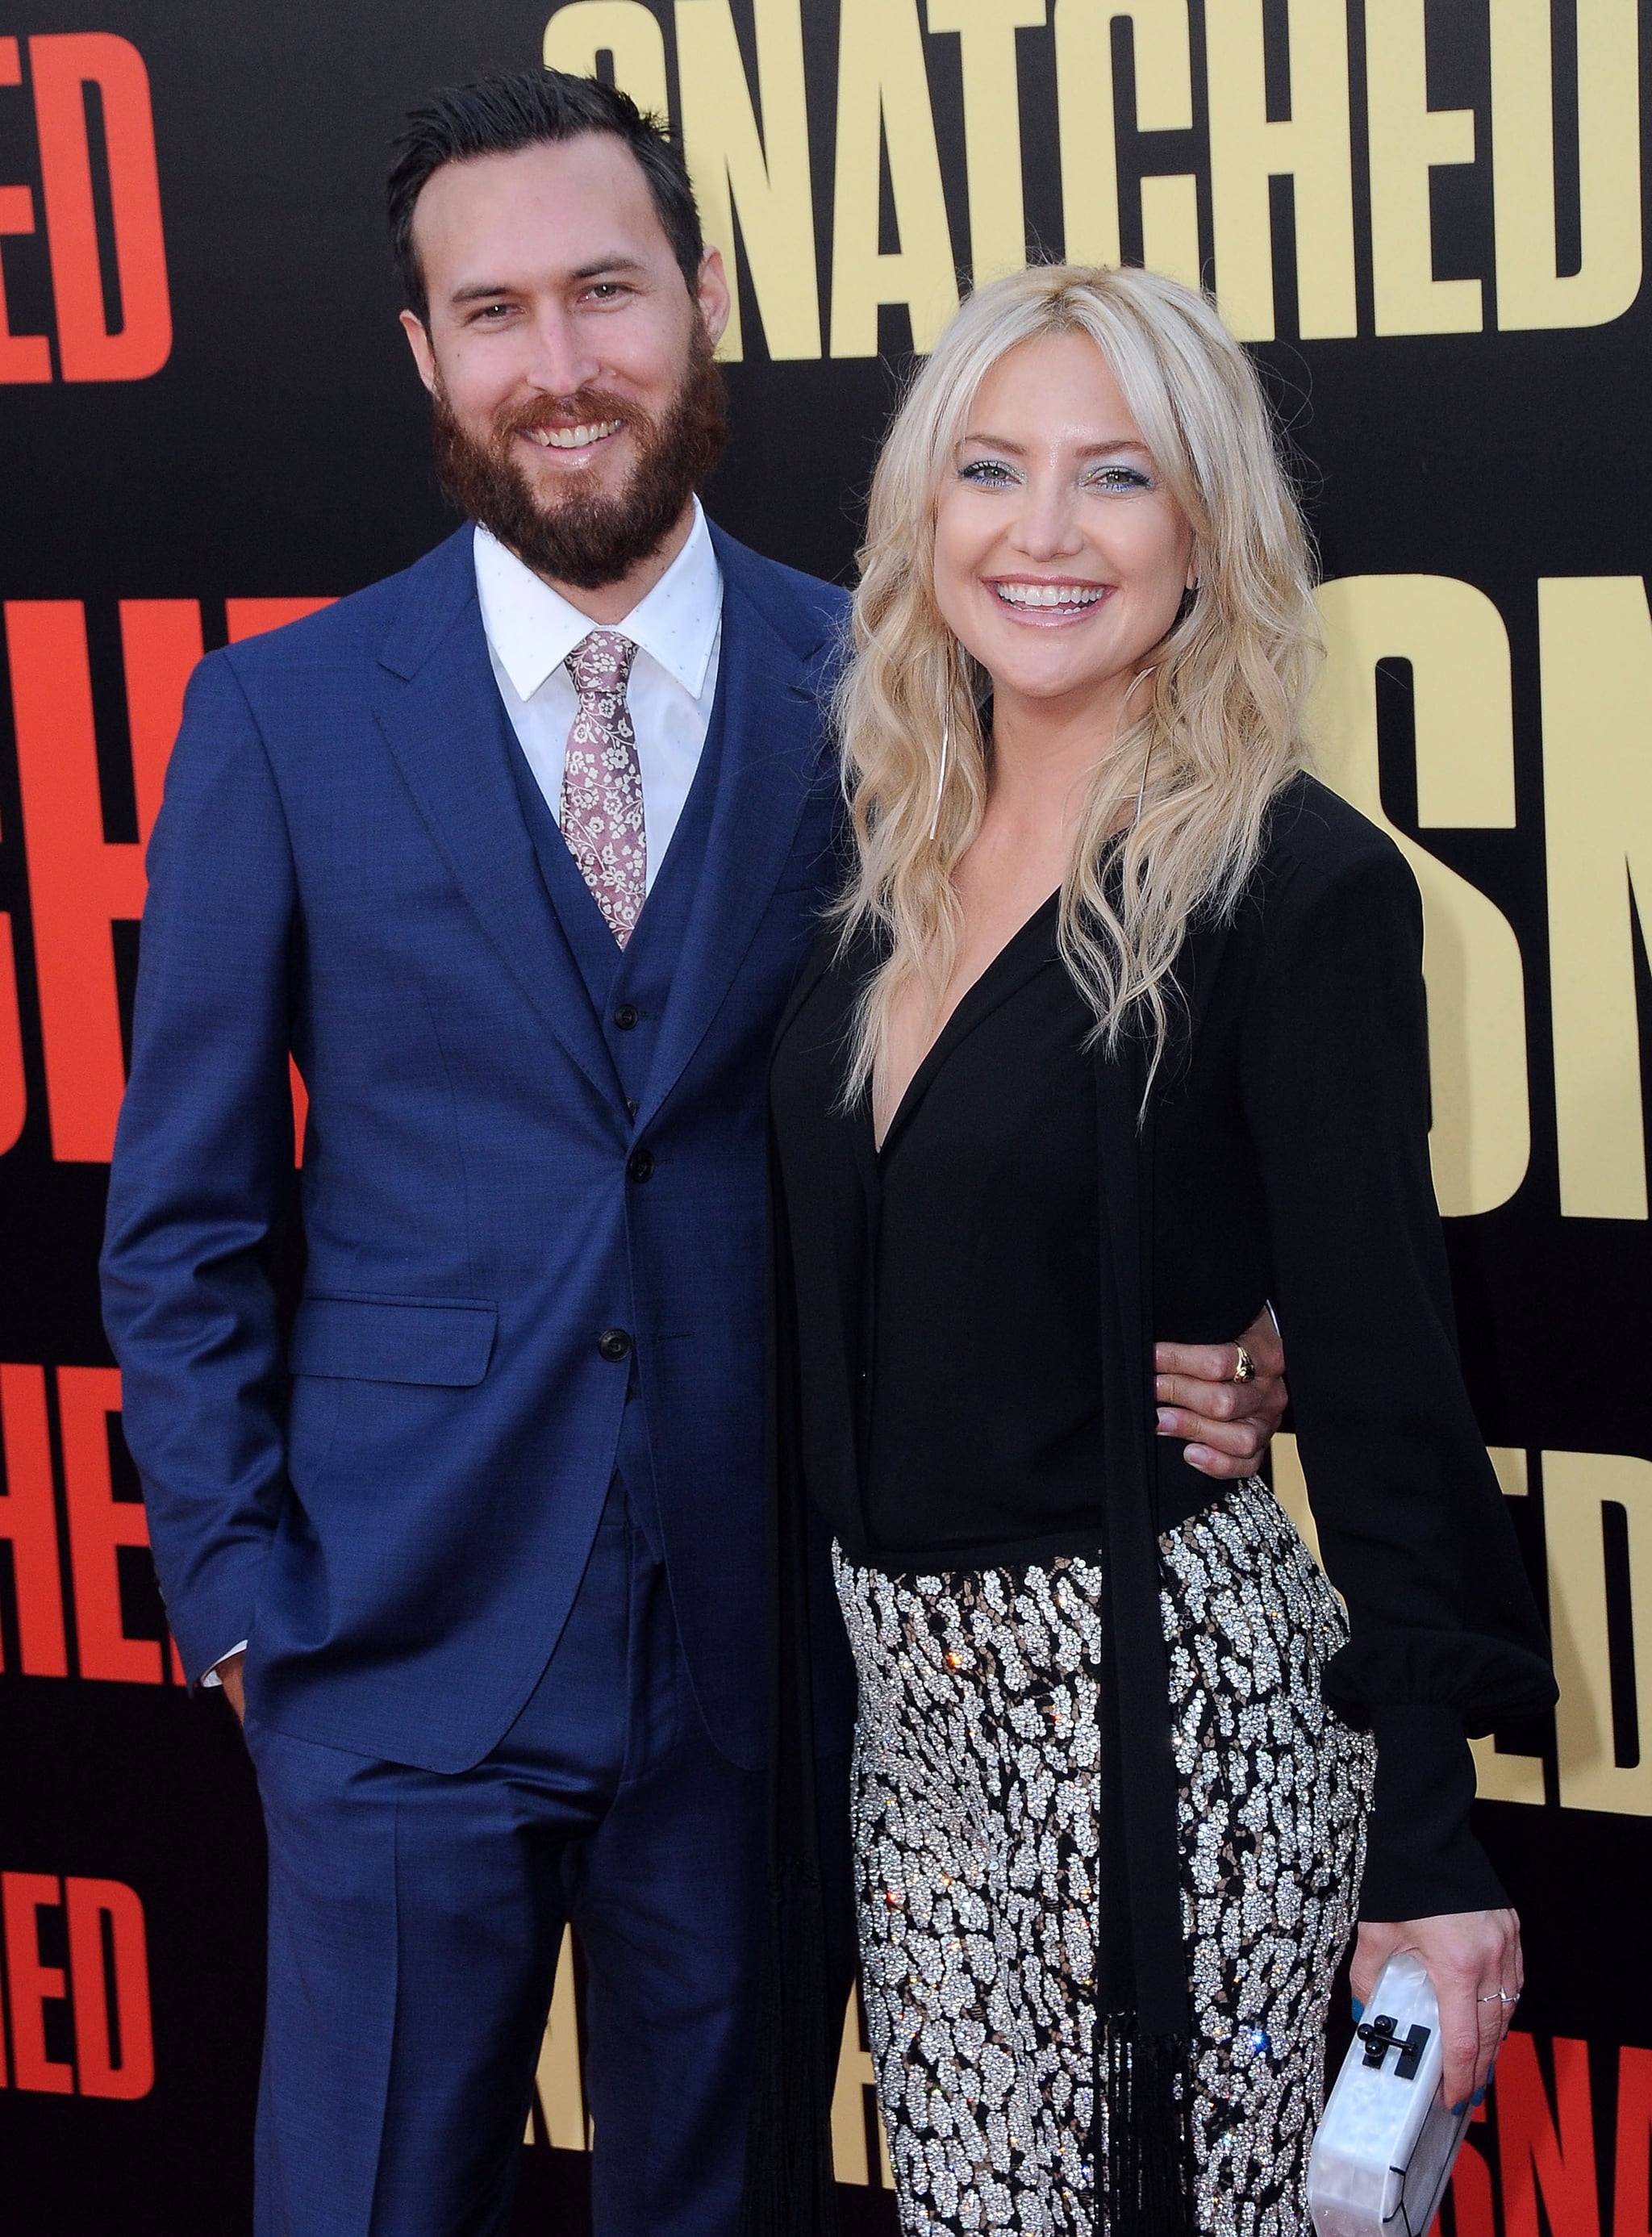 WESTWOOD, CA - MAY 10:  Actress Kate Hudson (R) and Danny Fujikawa (L) attend premiere of 20th Century Fox's' 'Snatched' at Regency Village Theatre on May 10, 2017 in Westwood, California.  (Photo by Barry King/Getty Images)